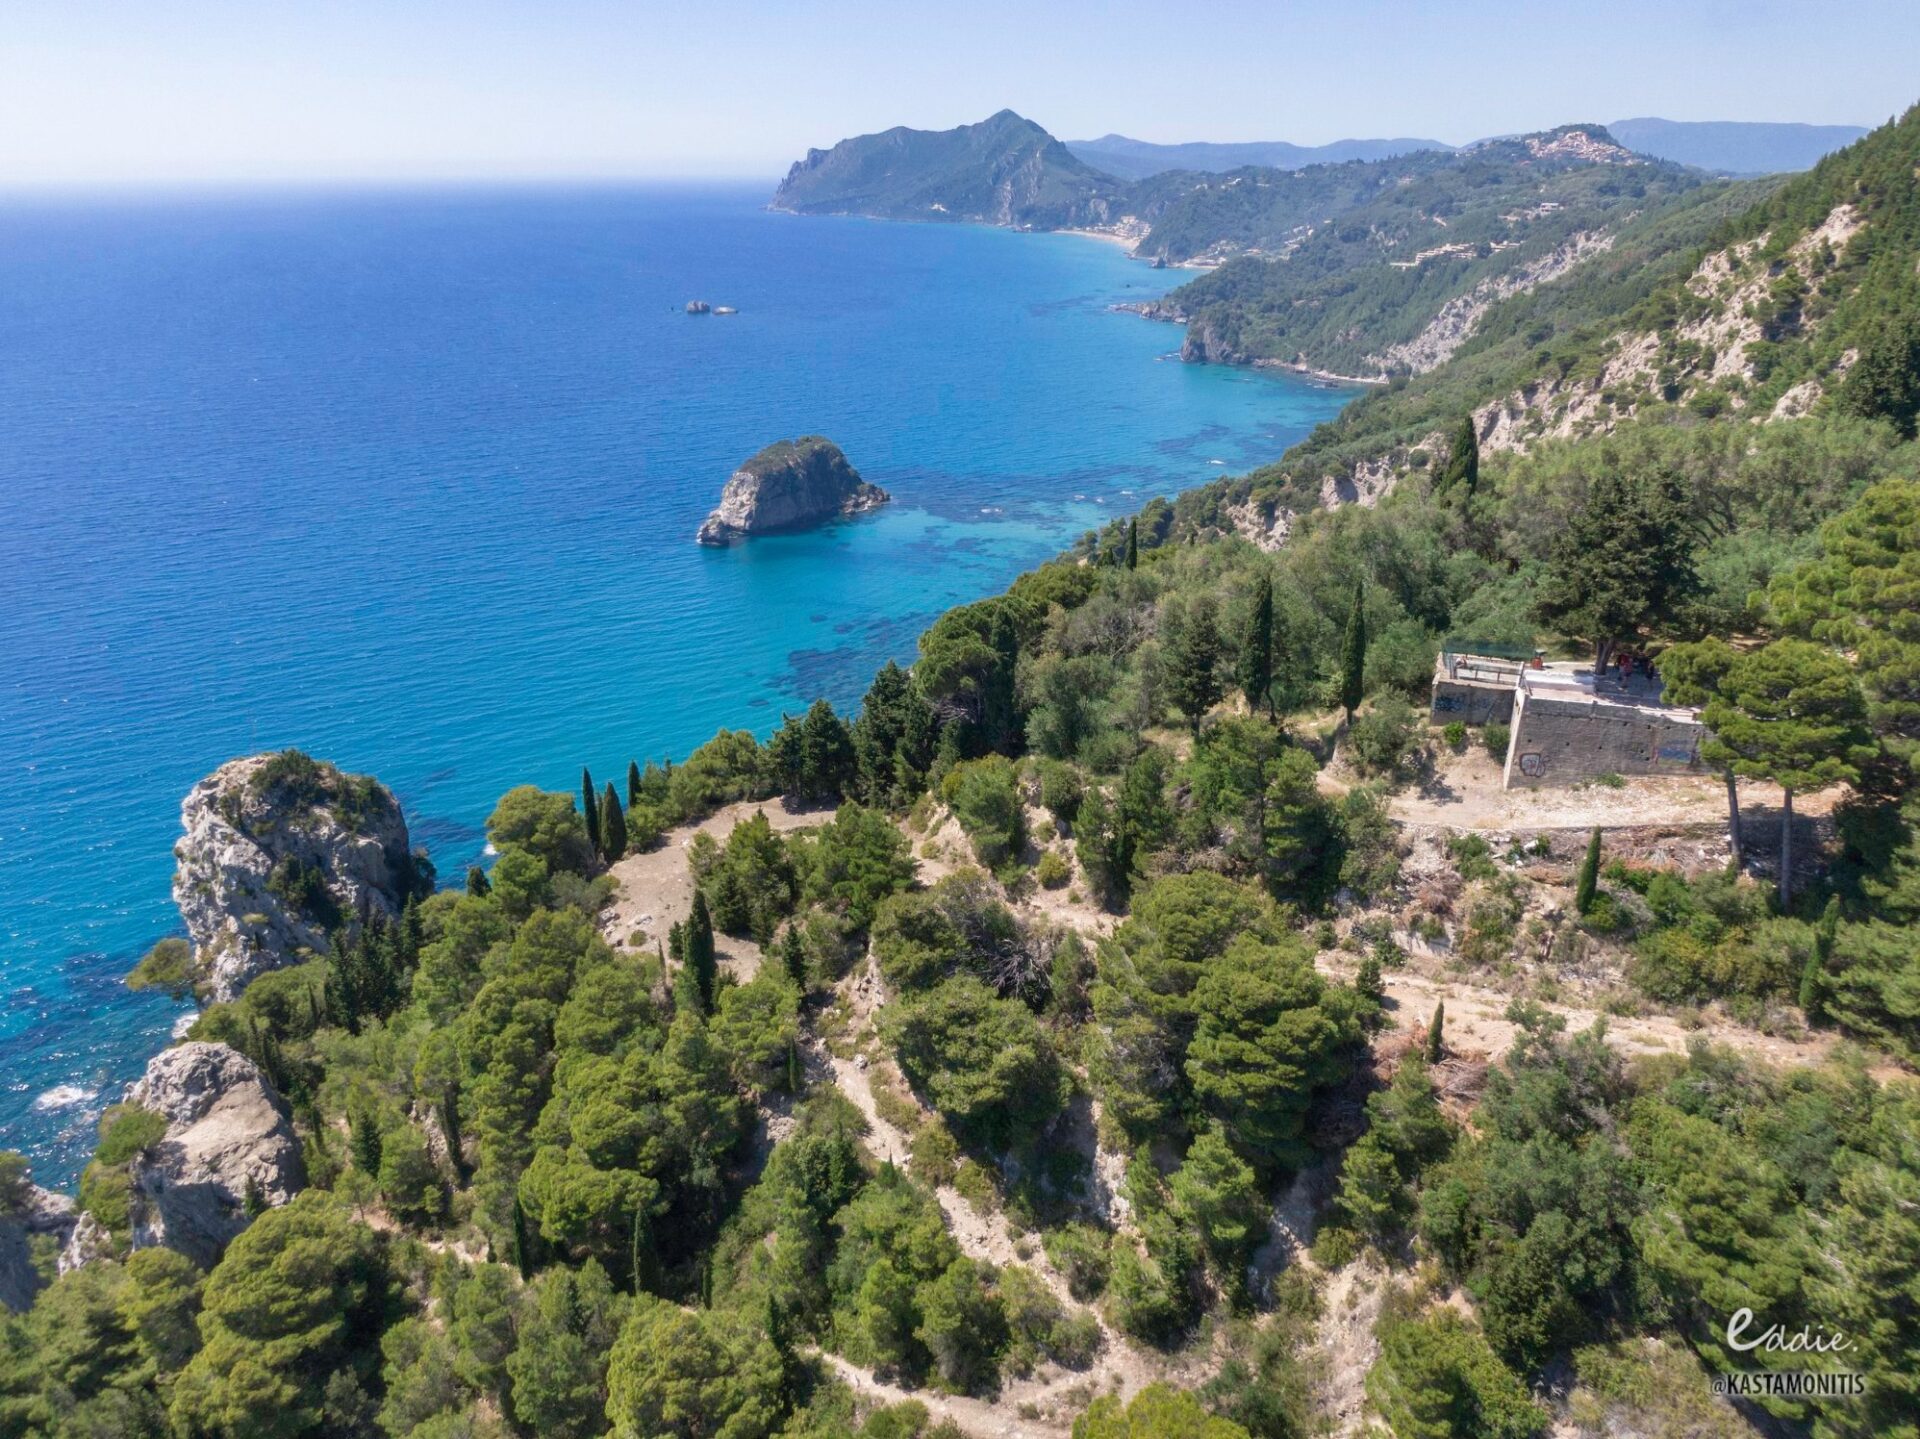 Private Corfu Beaches Tour: Discover the Most Iconic Beaches